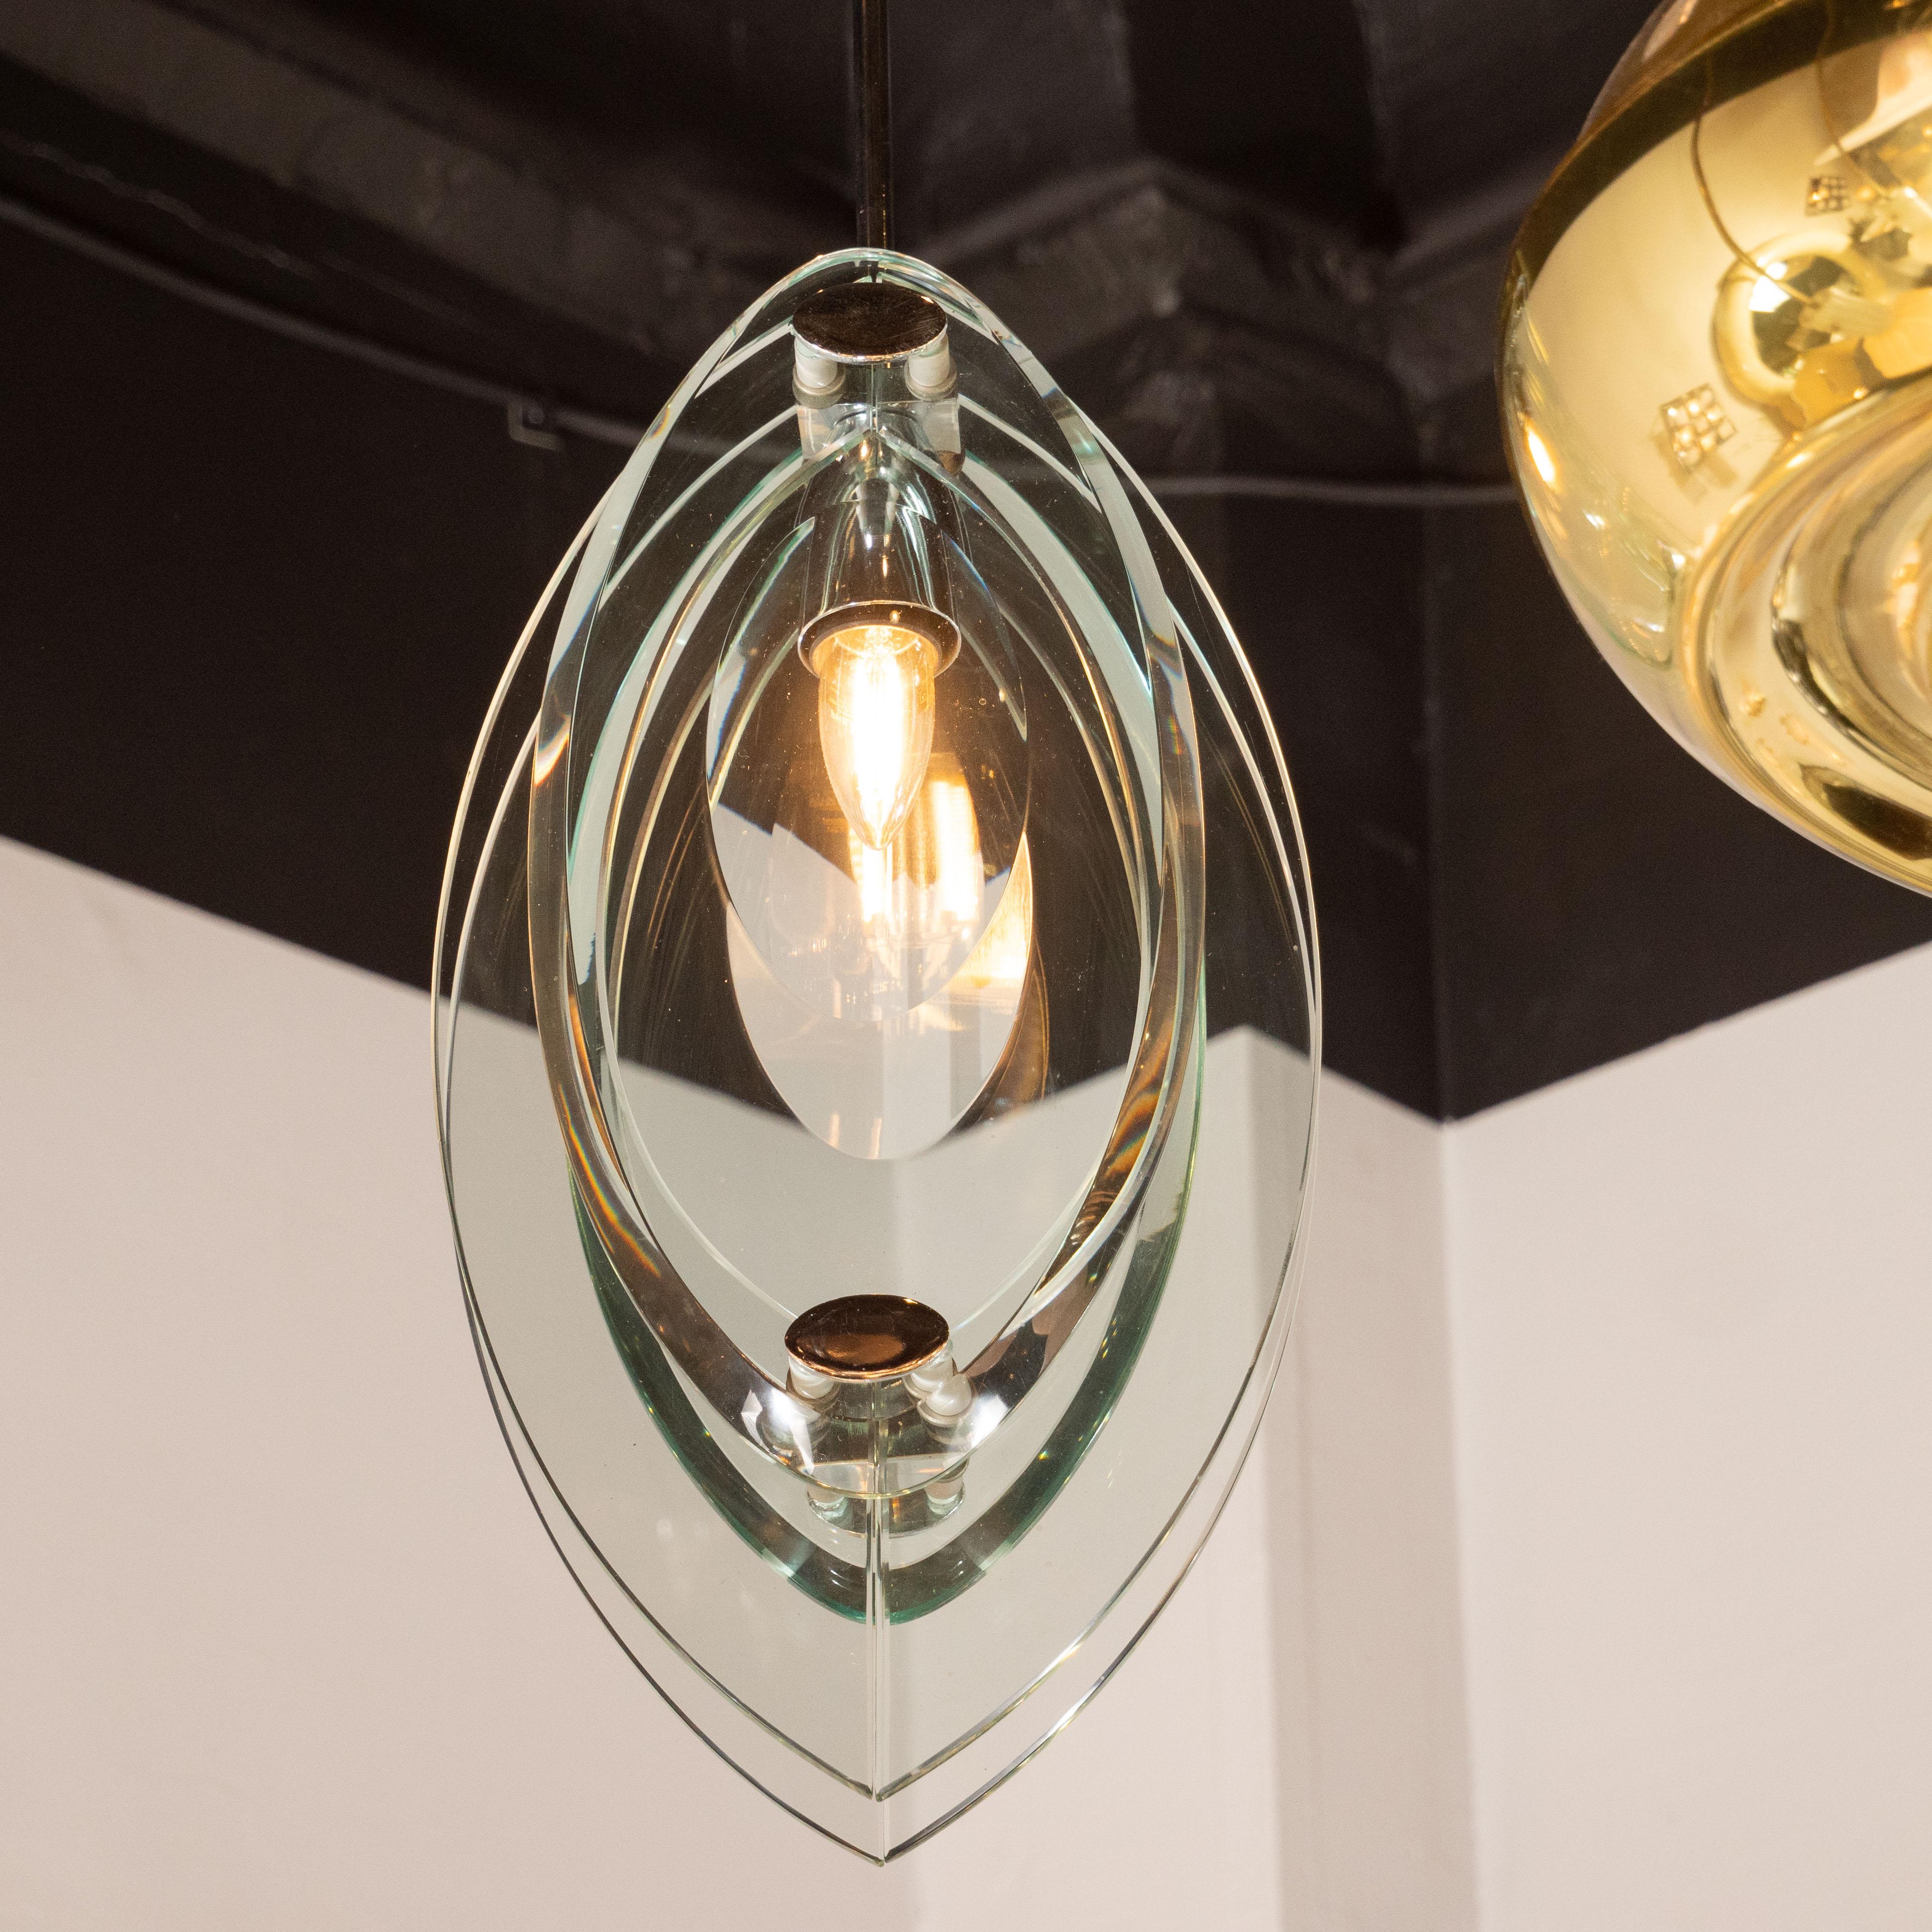 Italian Mid-Century Modern Pendant with Chrome Fittings in the Manner of Fontana Arte